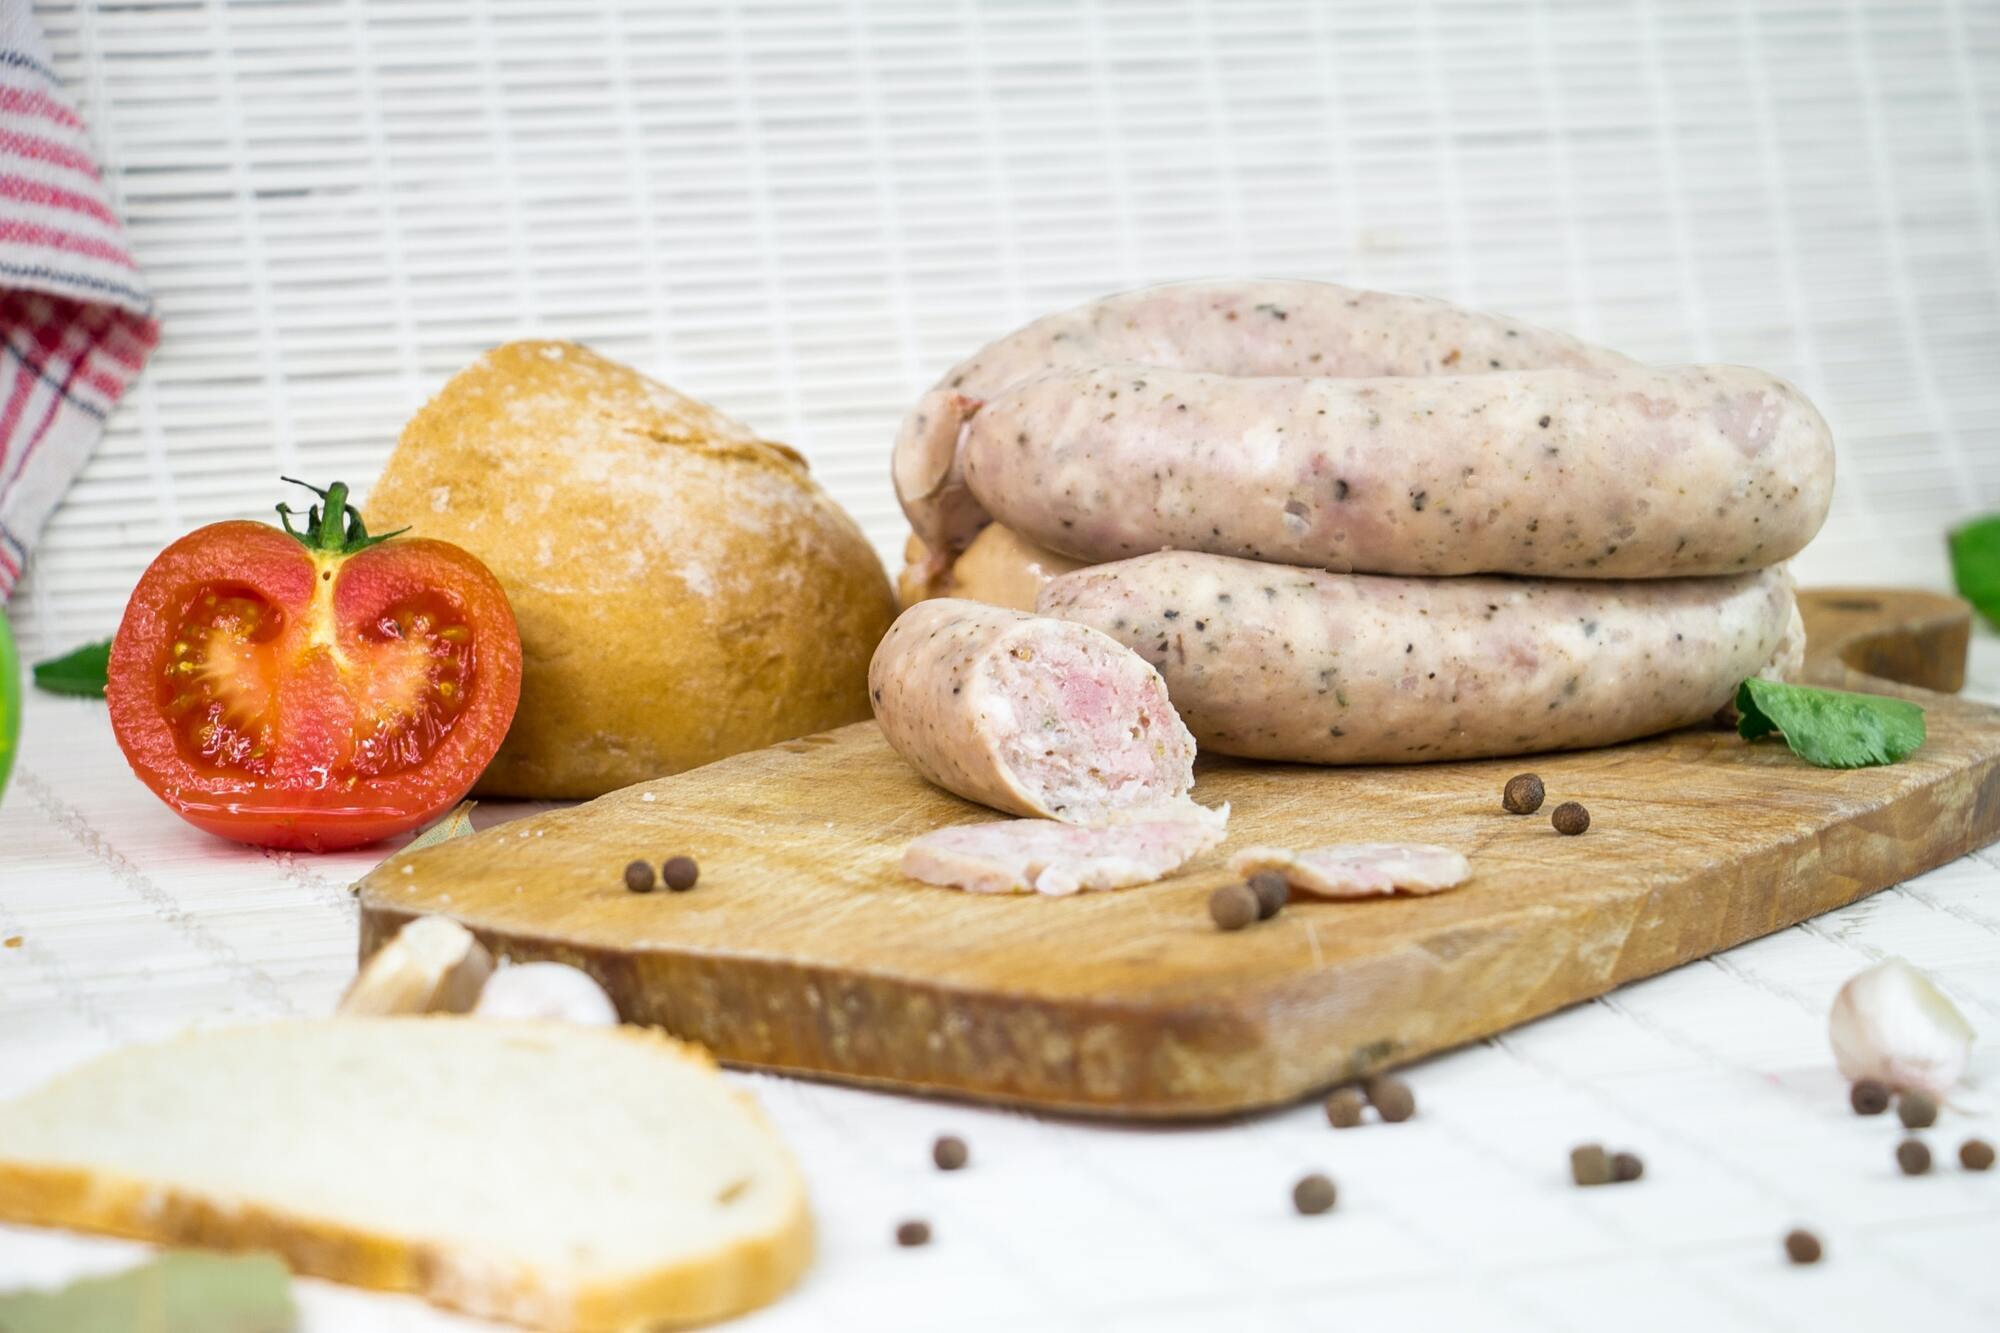 Homemade sausages for children